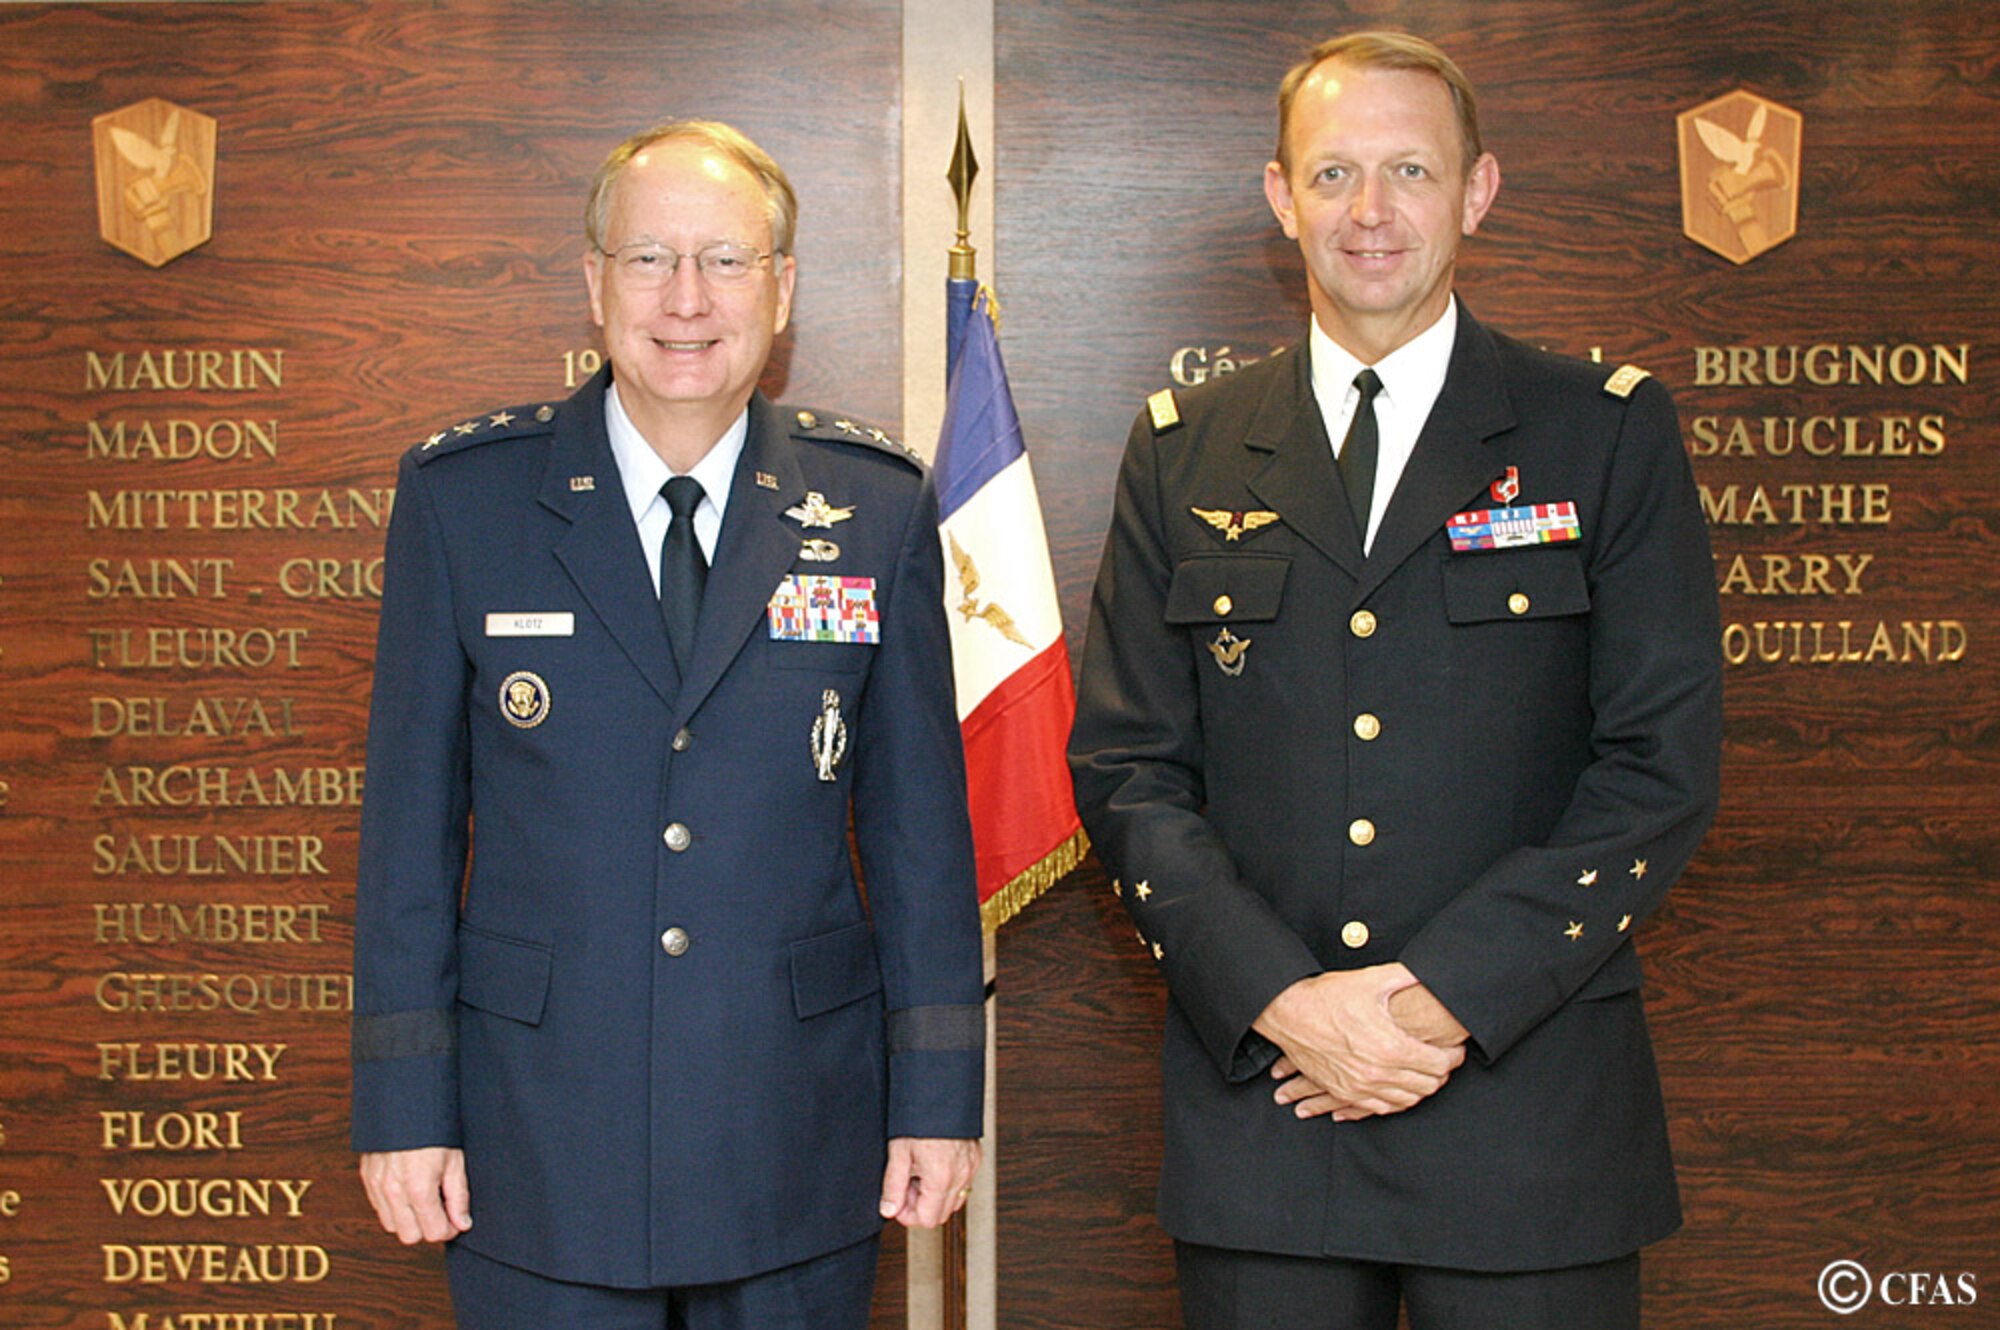 Lt. Gen. Frank Klotz, Commander of Air Force Global Strike Command and Lt.
Gen. Paul Fouilland, Commander in Chief of the French Strategic Air Forces
during a Global Strike Command visit to French air bases in July.  The two
shared information, experiences, and approaches to common challenges as part
of a continuing dialogue between their nations' strategic air forces. (Photo
Courtesy of French Strategic Air Forces)